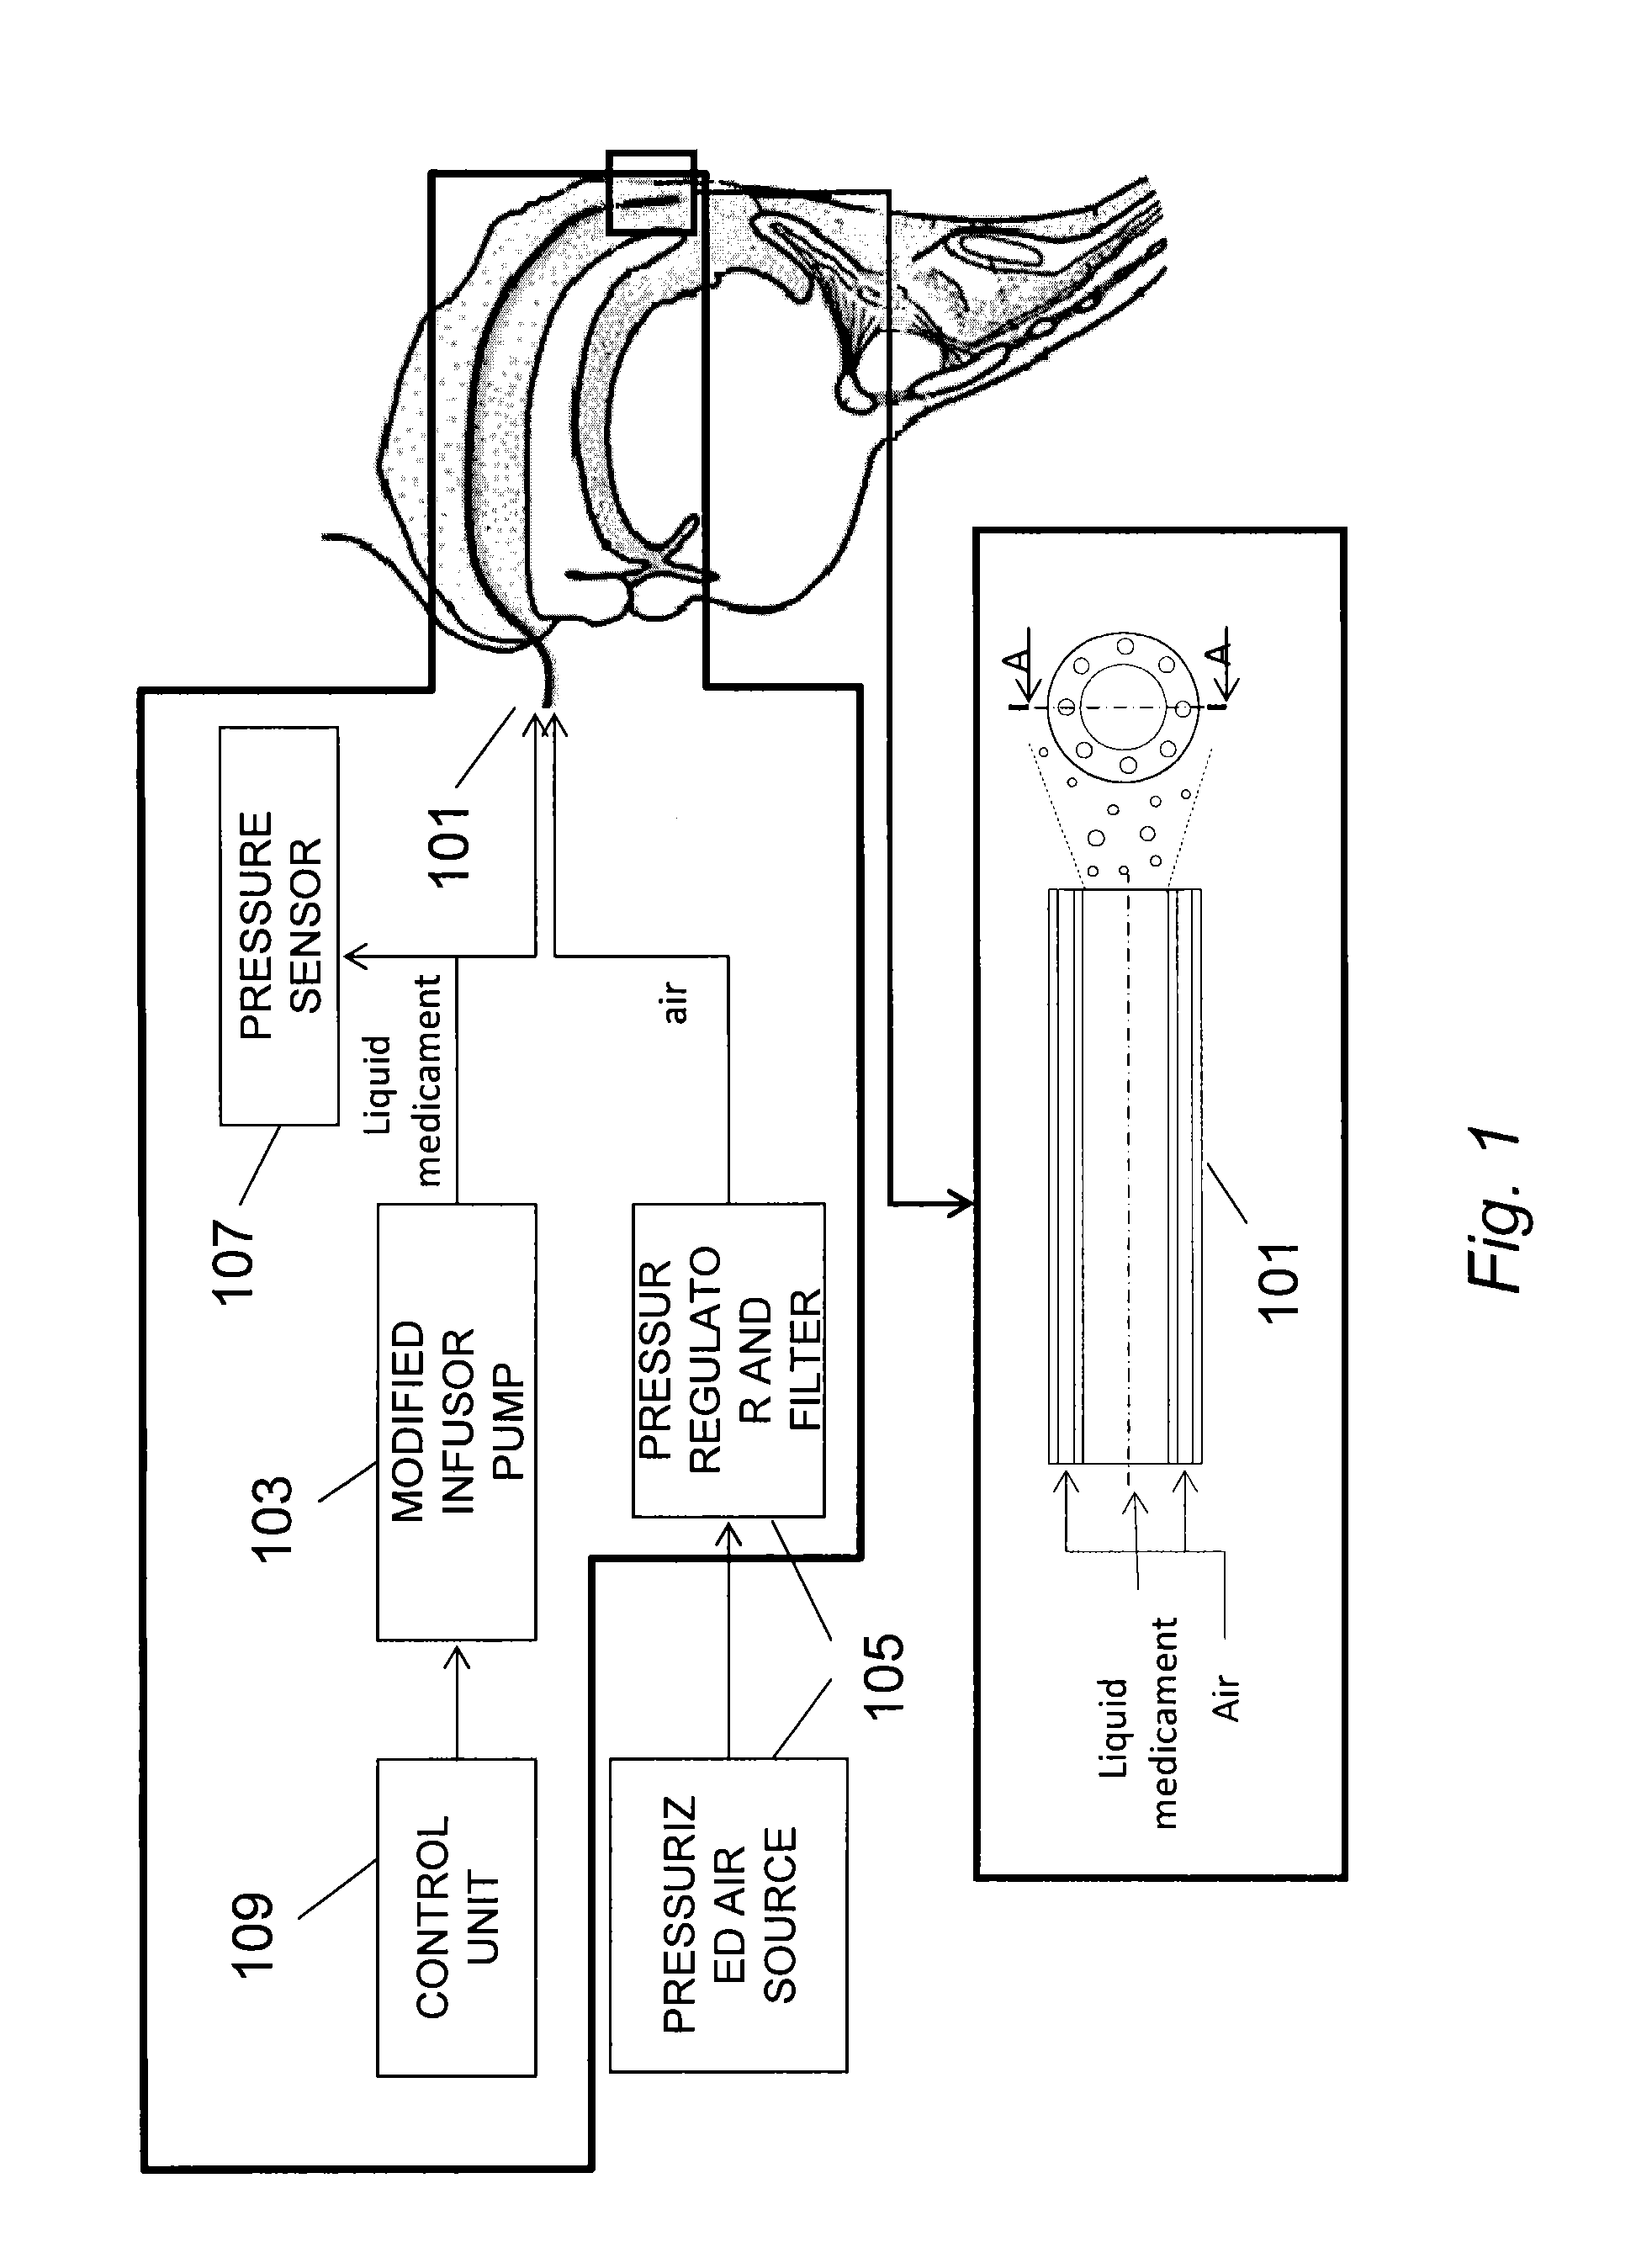 Method and system for the administration of a pulmonary surfactant by atomization